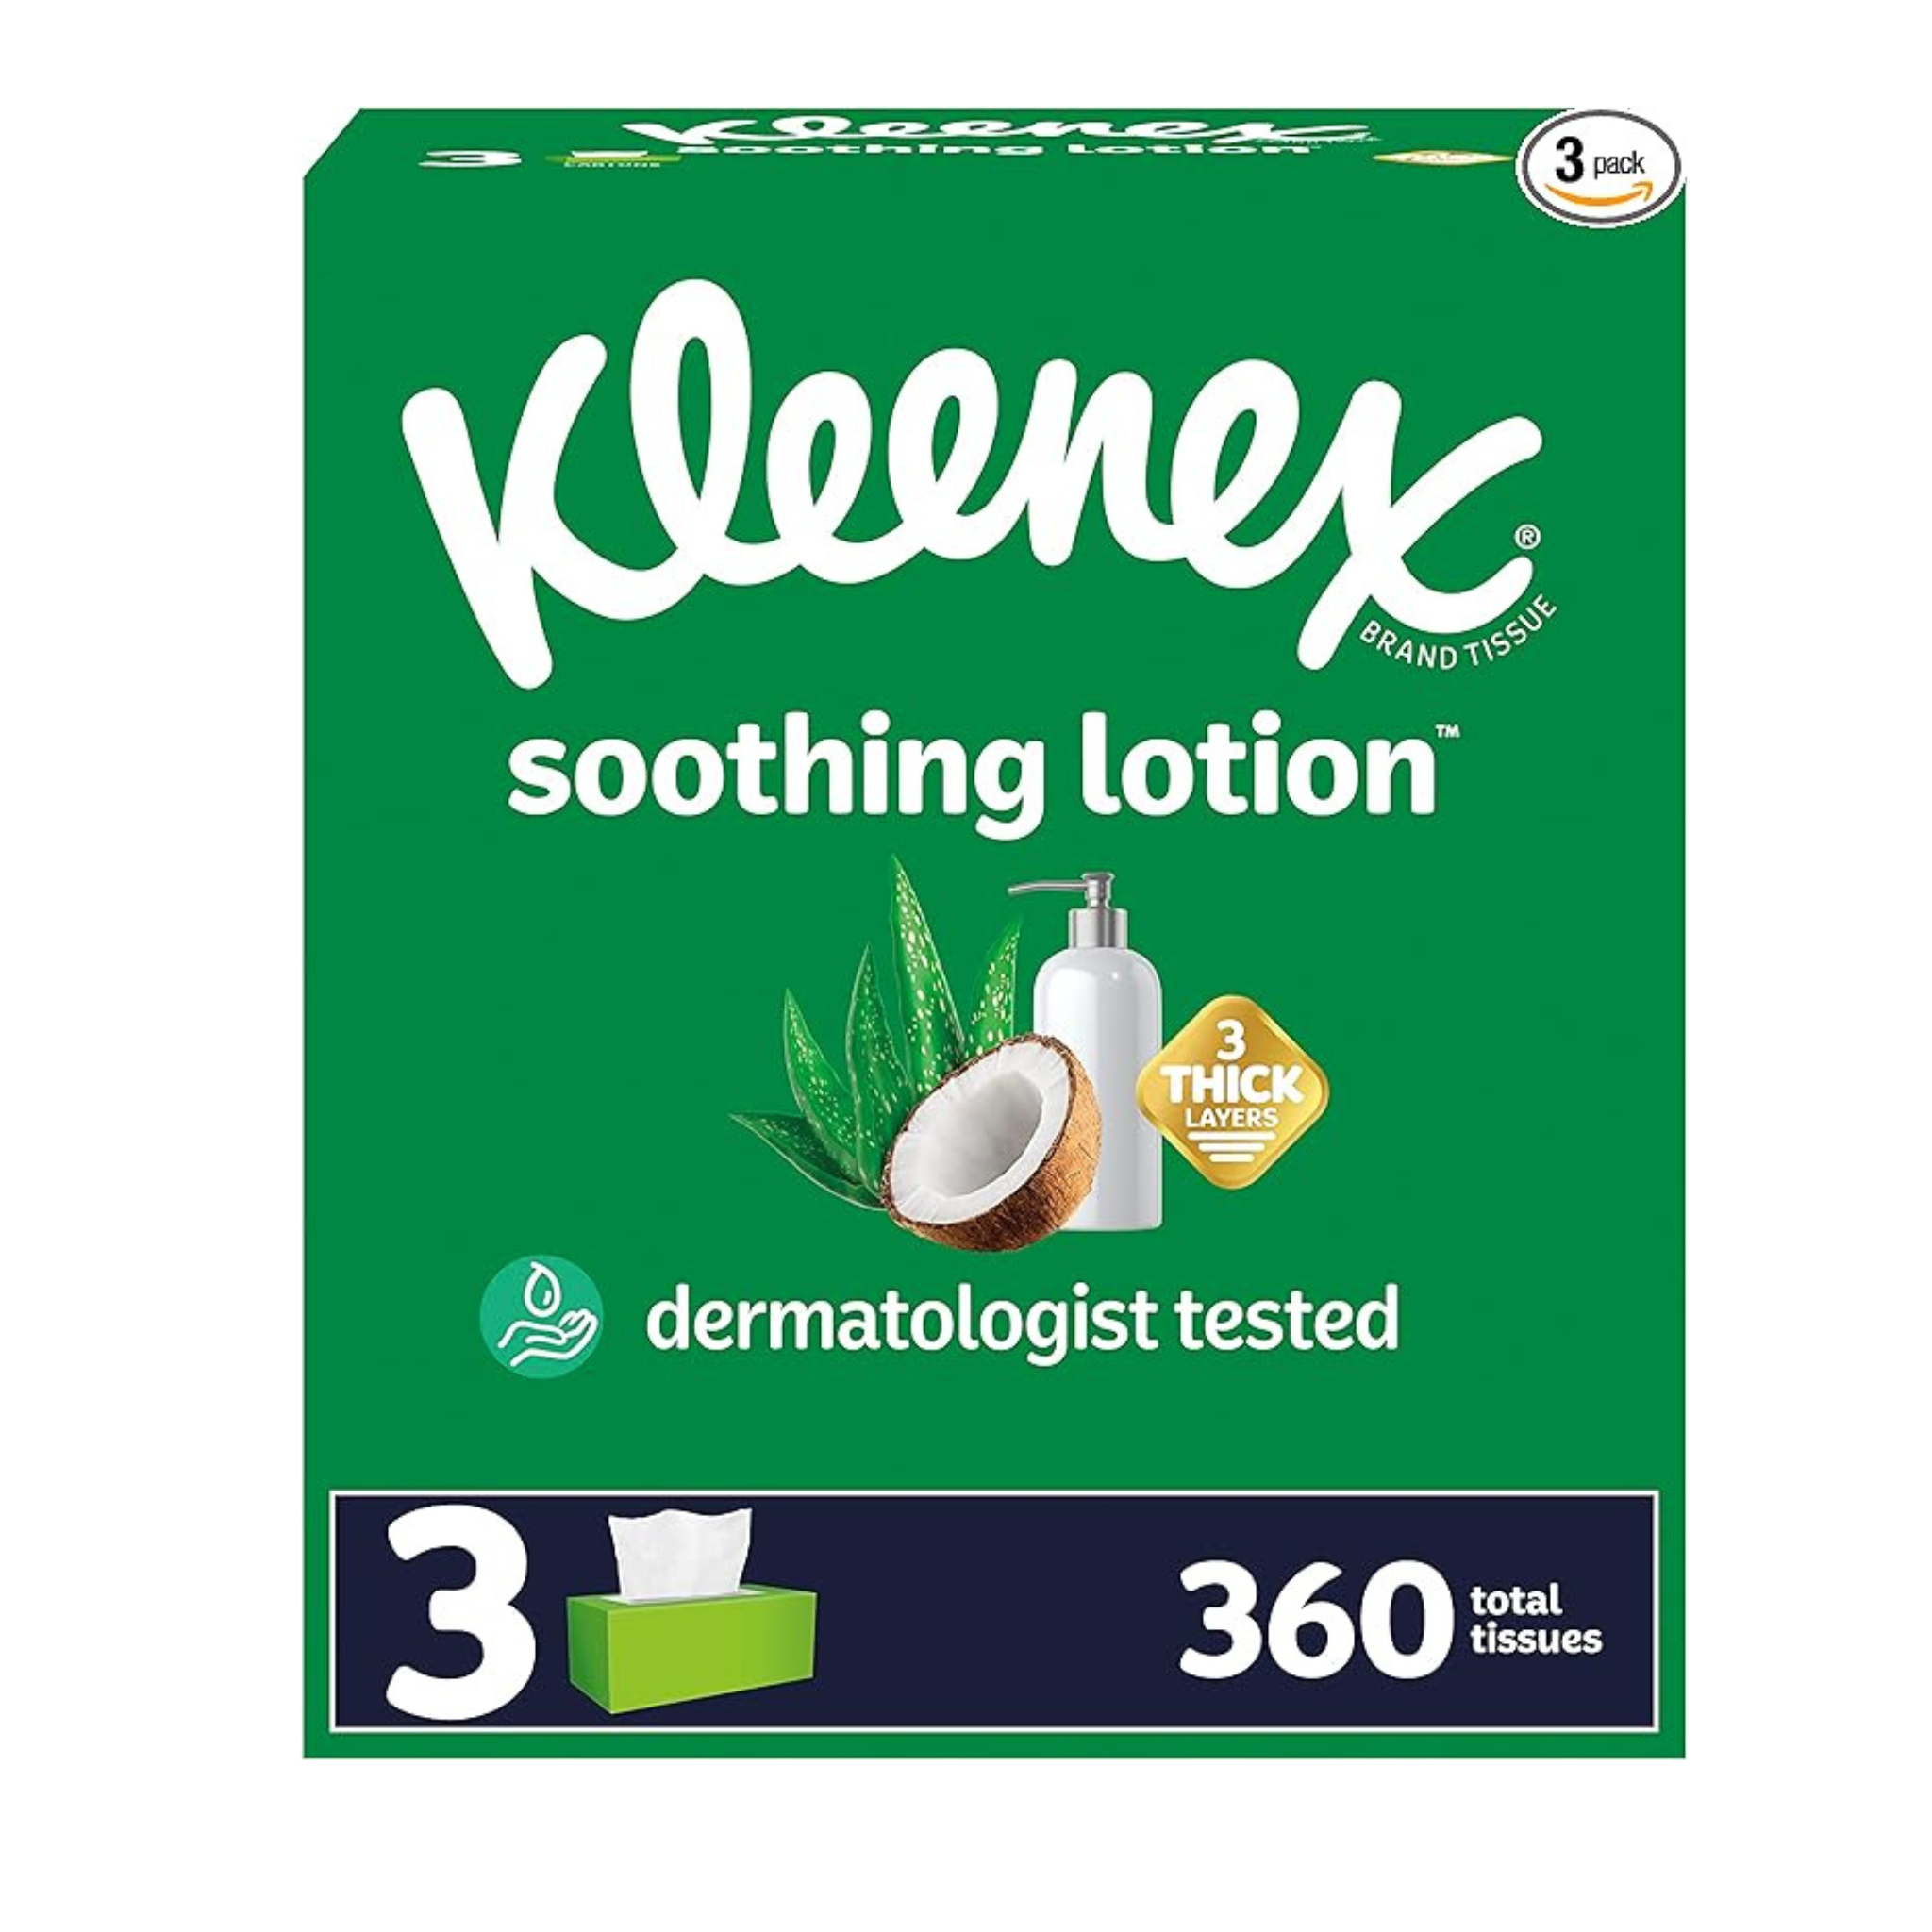 3-Pack 120-Count Kleenex 3-Layer Facial Tissues (Soothing Lotion)